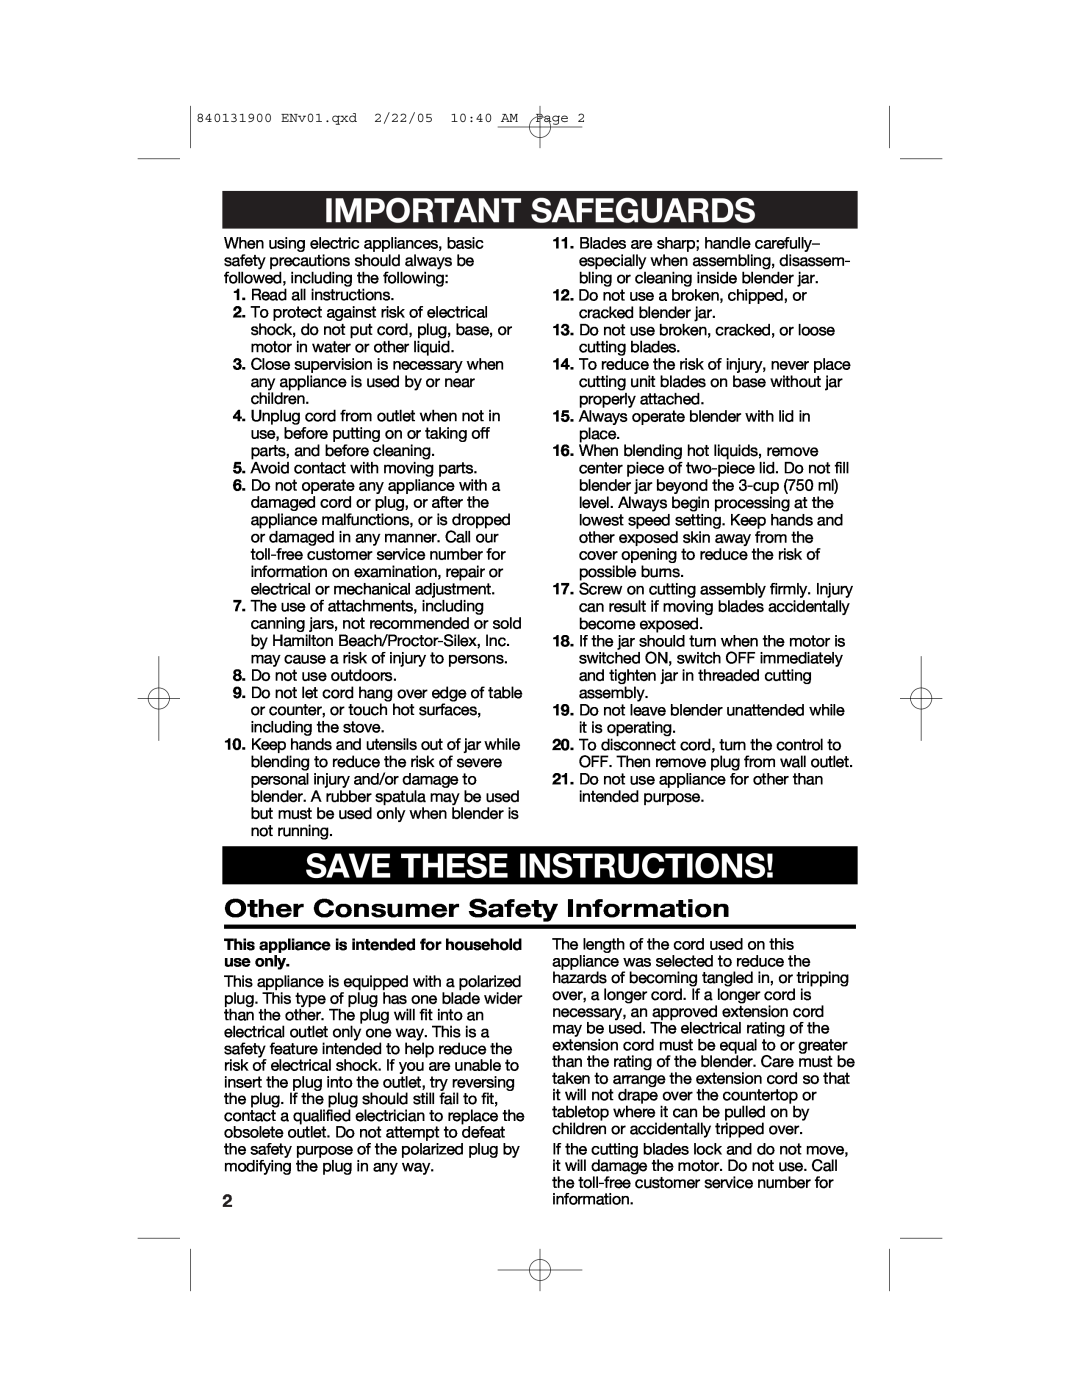 Hamilton Beach 50754C manual Important Safeguards, Save These Instructions, Other Consumer Safety Information 